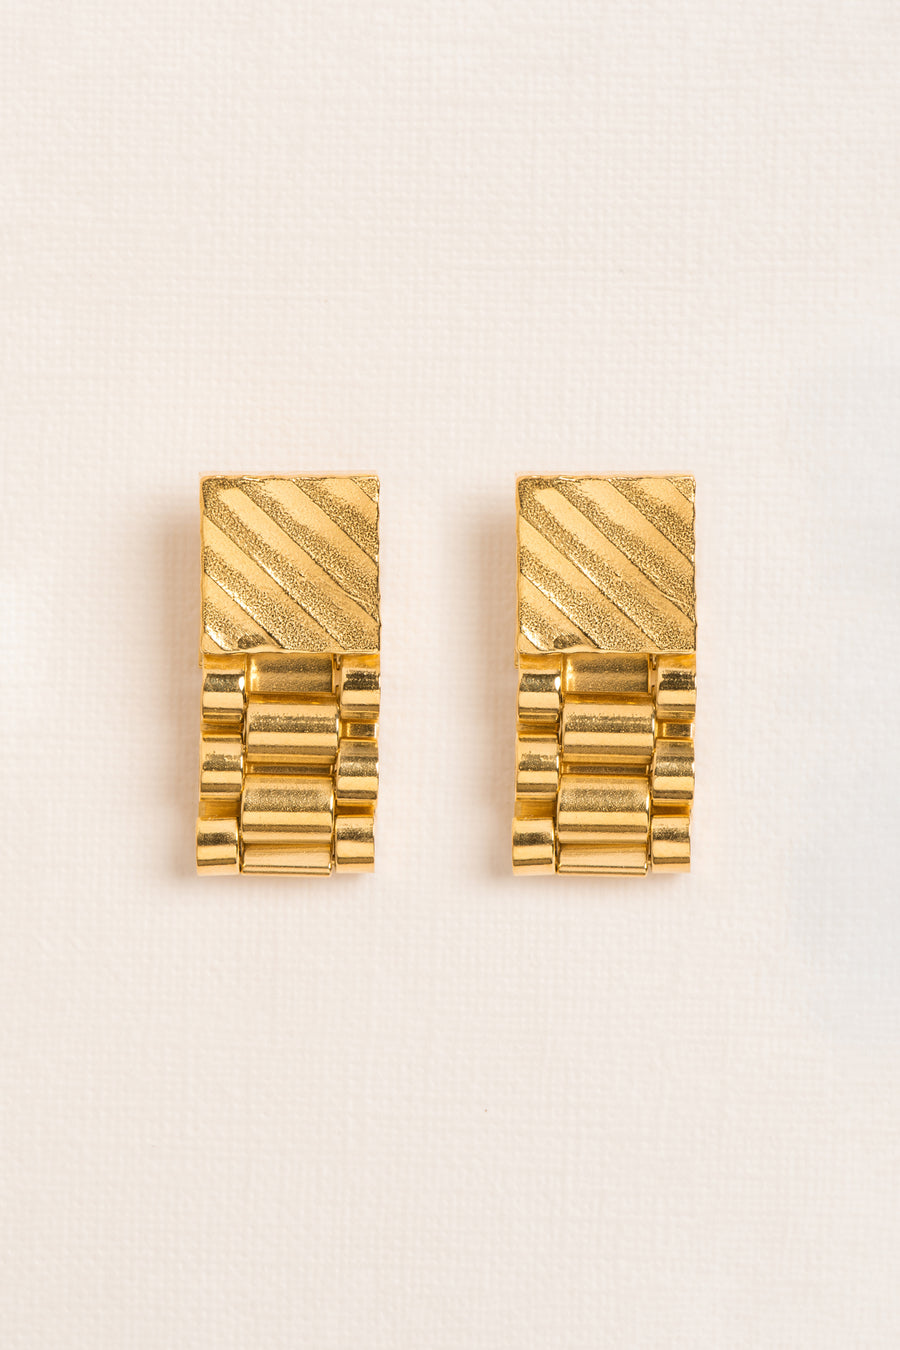 Wouters & Hendrix - Cufflink and Watch Chain Stud Earrings in Gold